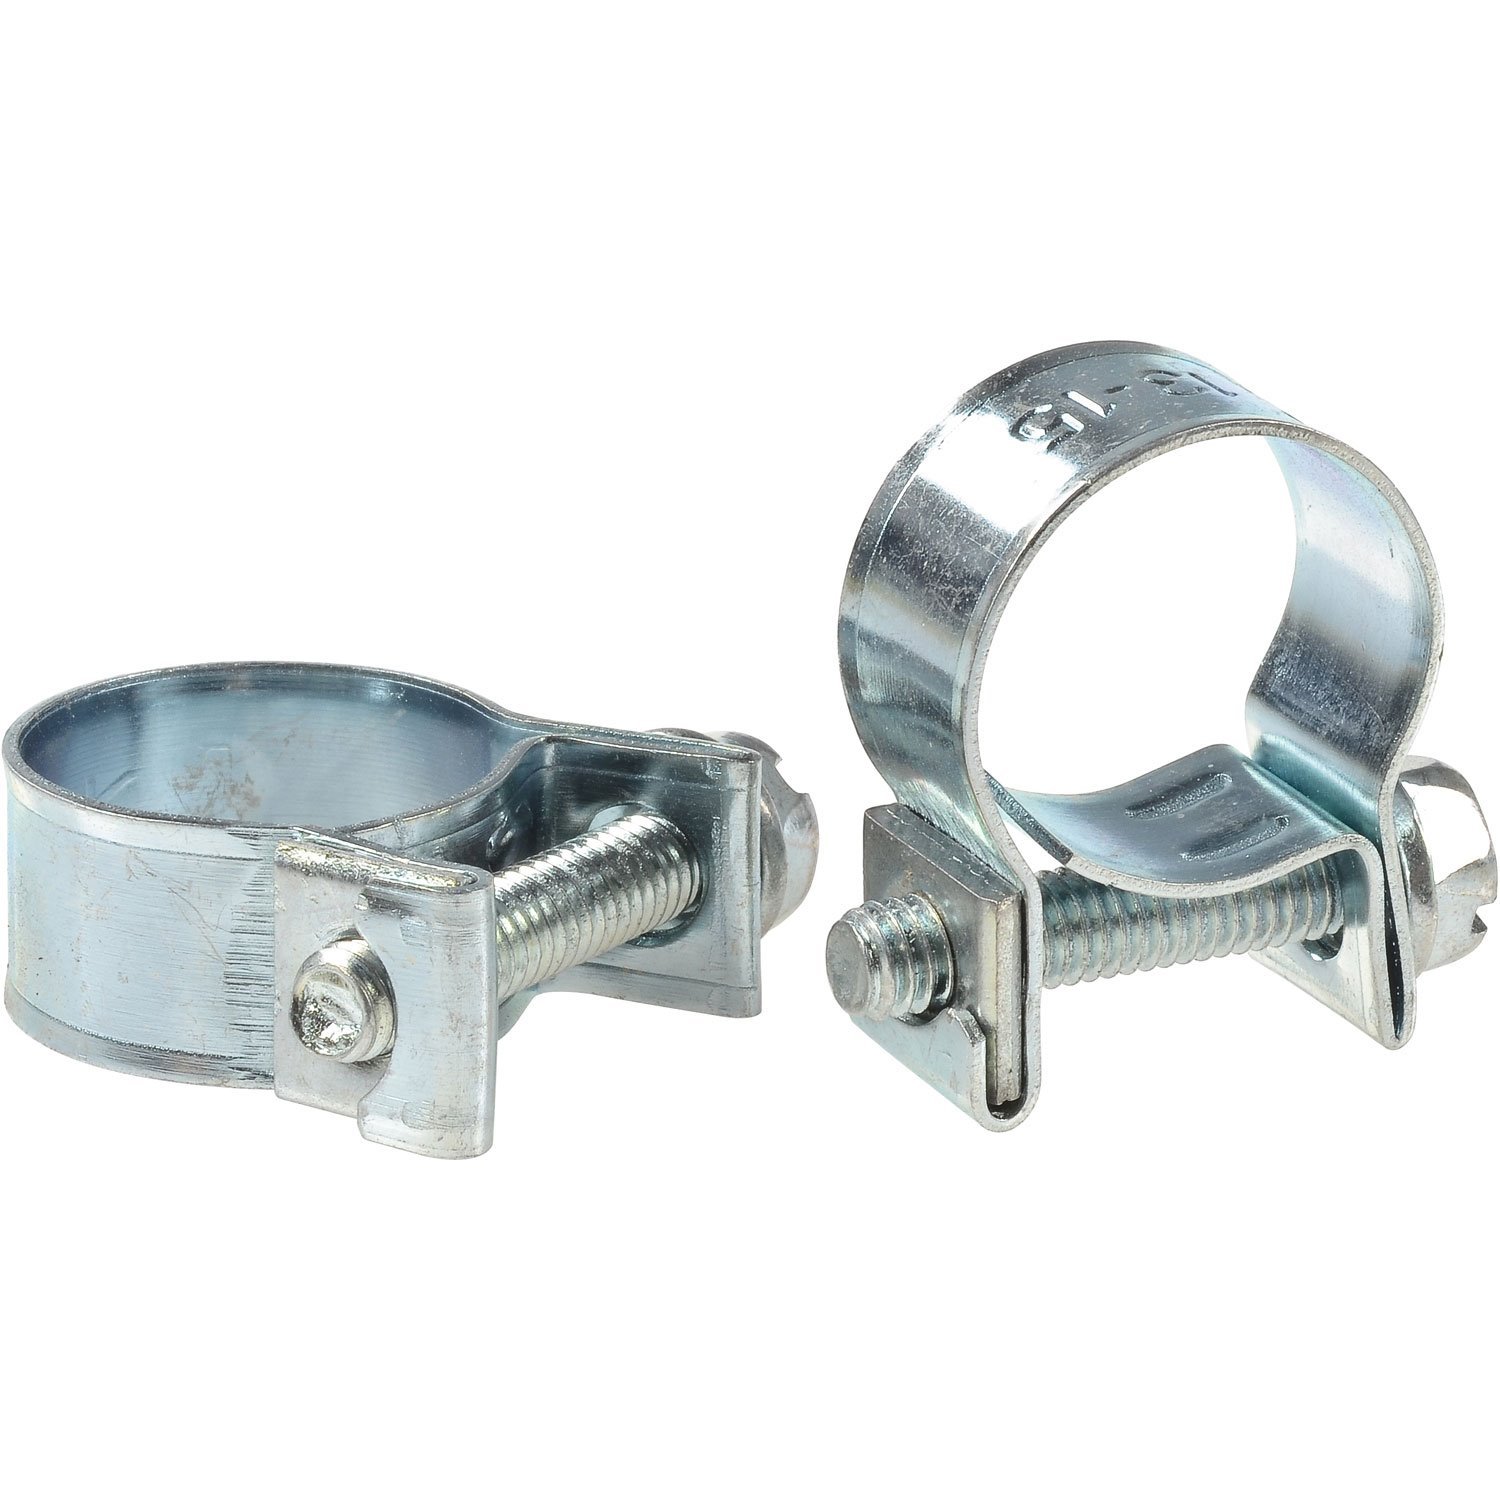 Fuel Injection Hose Clamps Fits 5/16